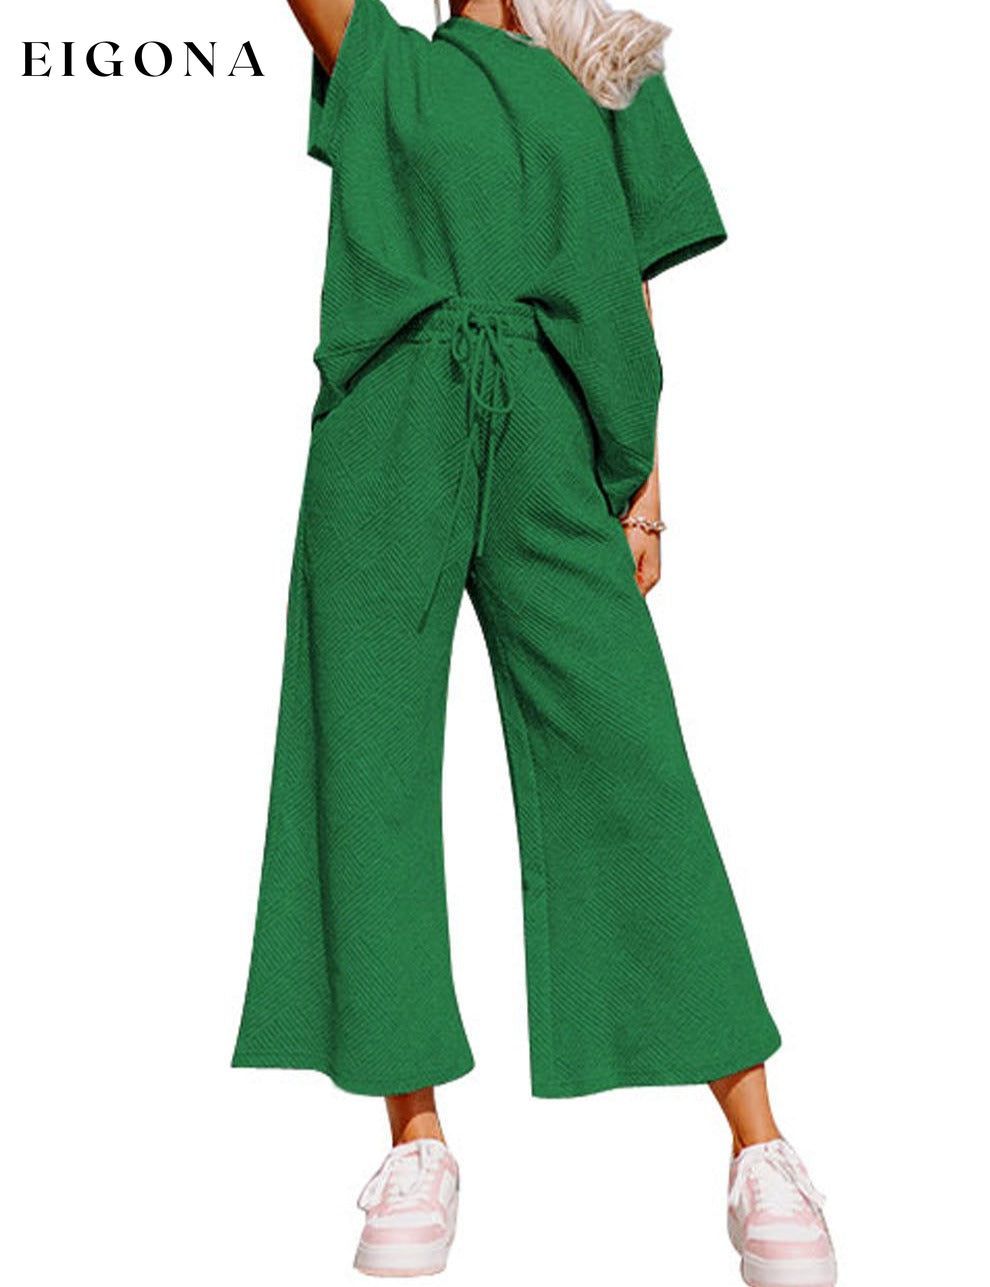 Dark Green Textured Loose Fit T Shirt and Drawstring Pants Set 2 pieces Best Sellers clothes EDM Homewear EDM Monthly Recomend Fabric Ribbed lounge wear Occasion Home pants set Print Solid Color Season Summer sets Silhouette Wide Leg Style Casual